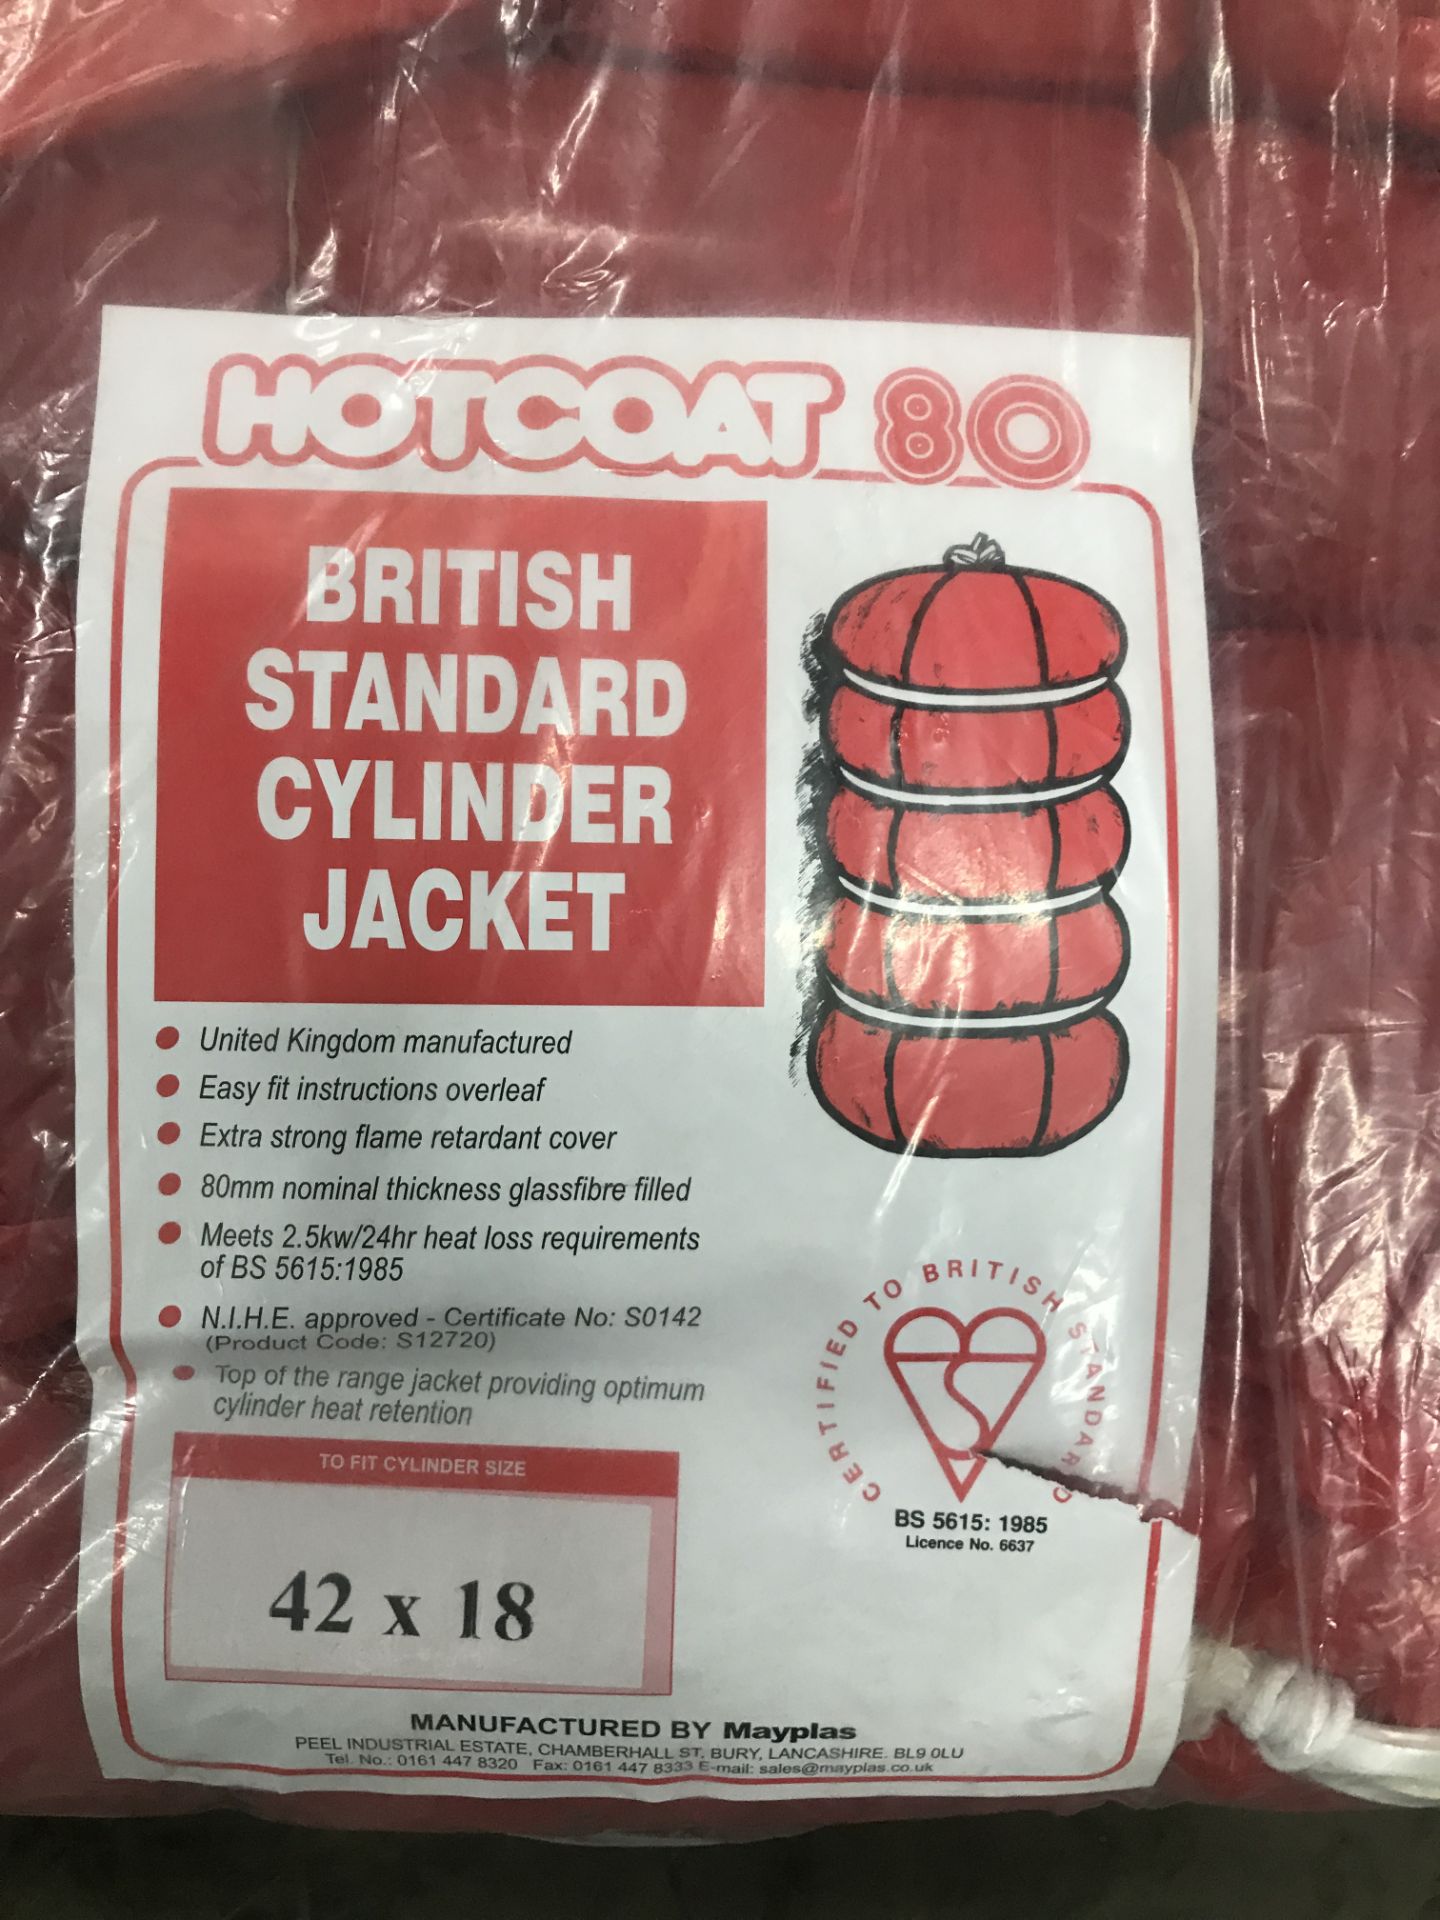 20 x Red Cylinder Boiler Jackets - 42" x 18" x 28" - Image 2 of 2